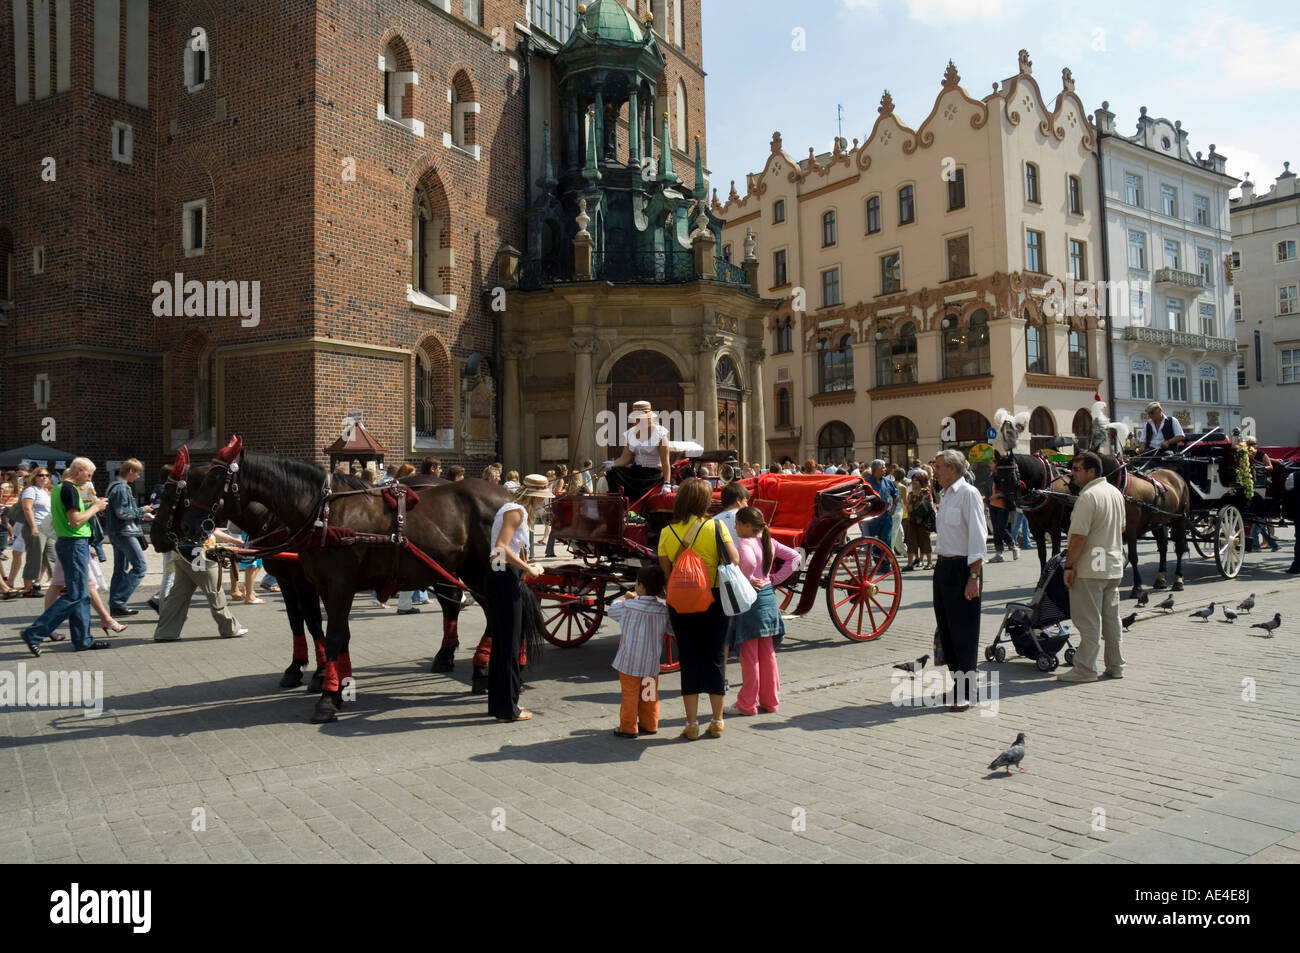 Horse & carriages in Main Market Square, Old Town District (Stare Miasto), Krakow (Cracow), UNESCO World Heritage Site, Poland Stock Photo